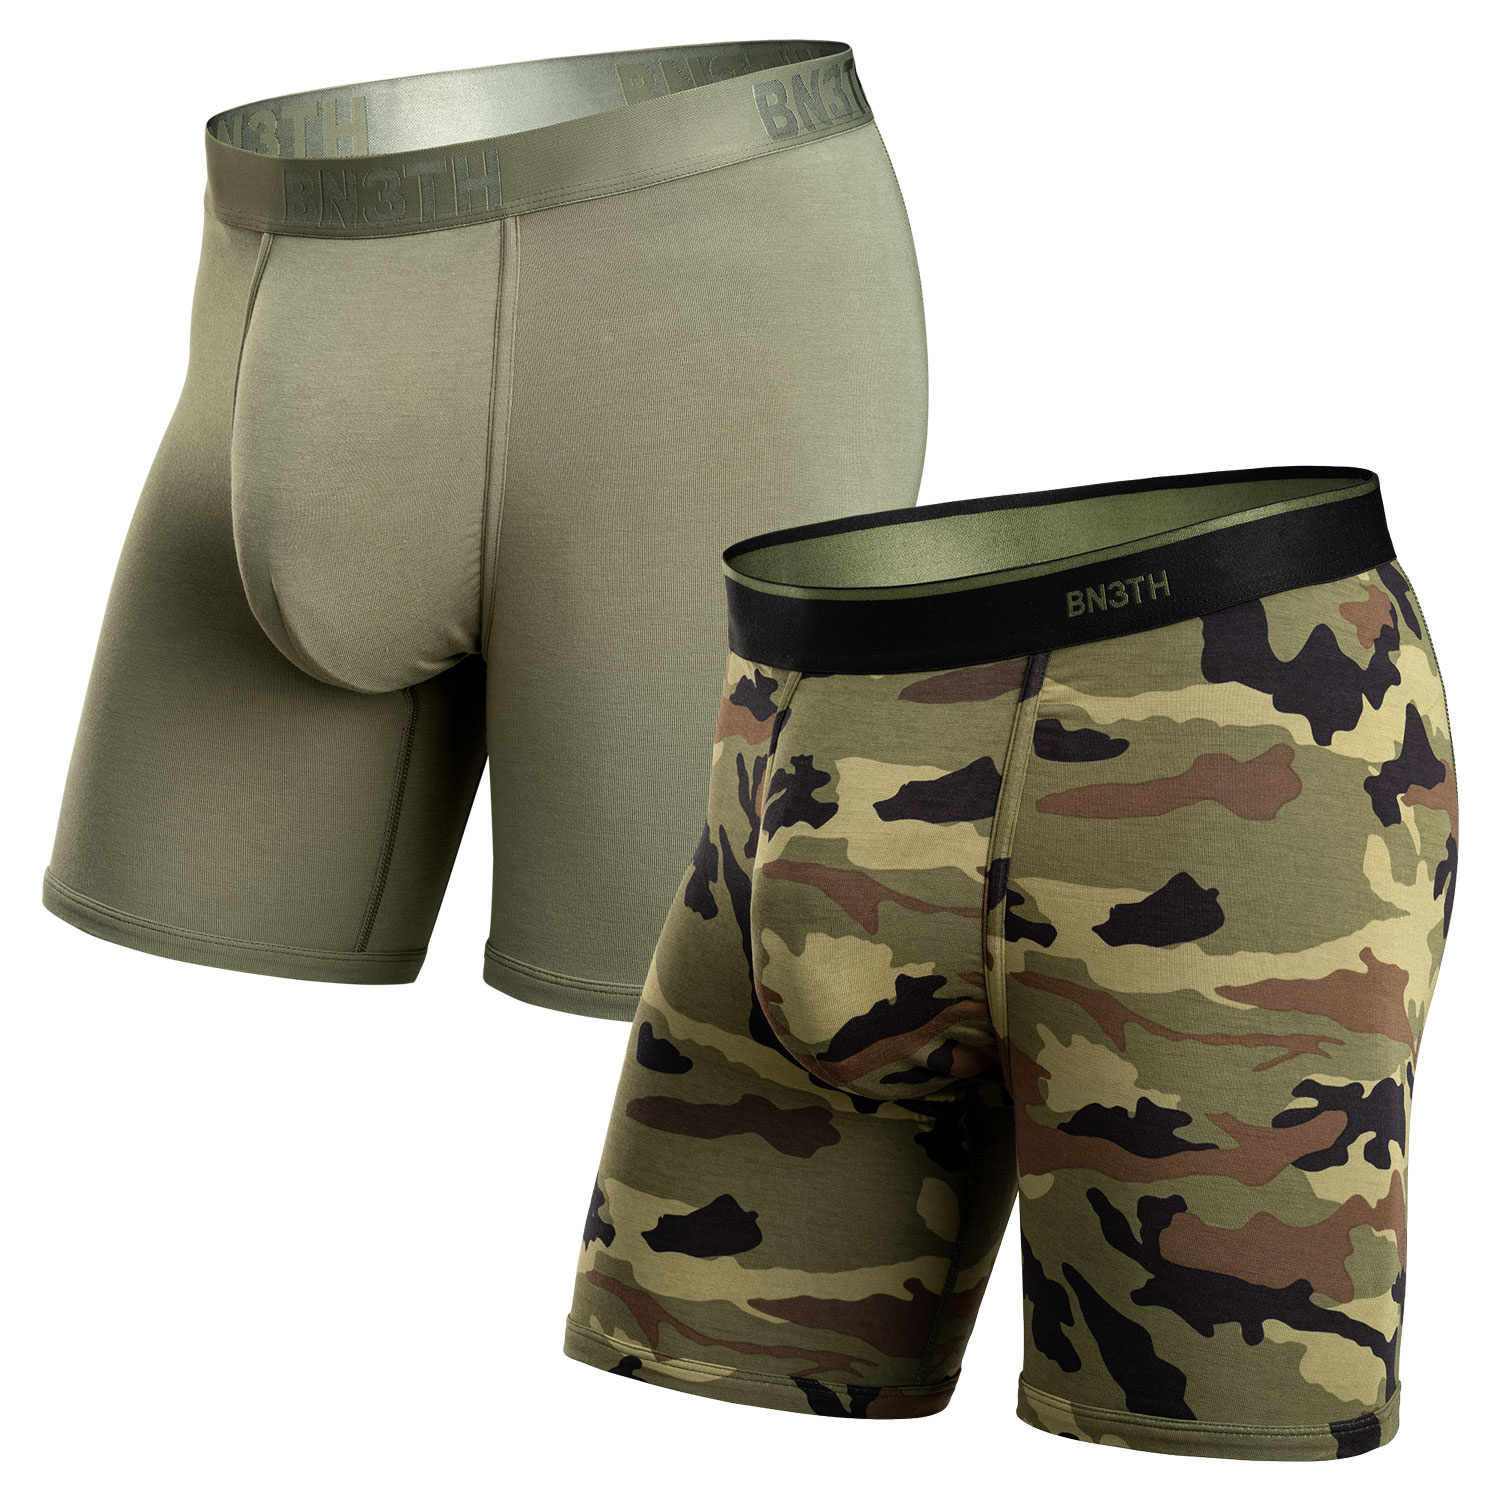 BN3TH - Men's Classic Boxer Brief - 2 Pack - Pine/Camo Green - 1128 - Big  Valley Sales